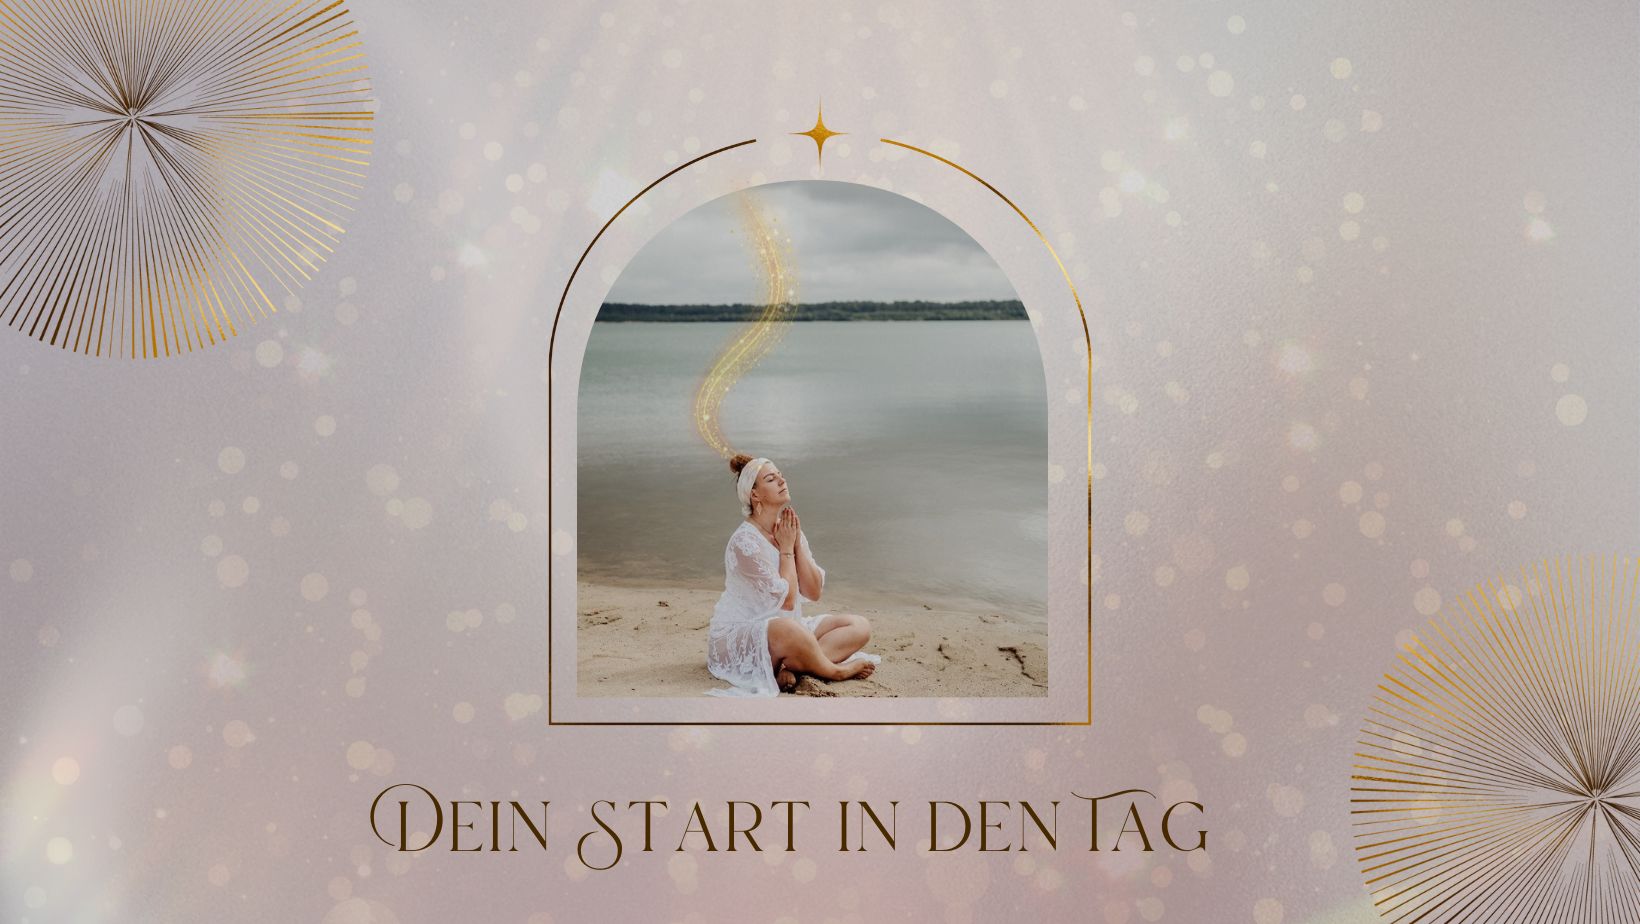 You are currently viewing Dein Start in den Tag